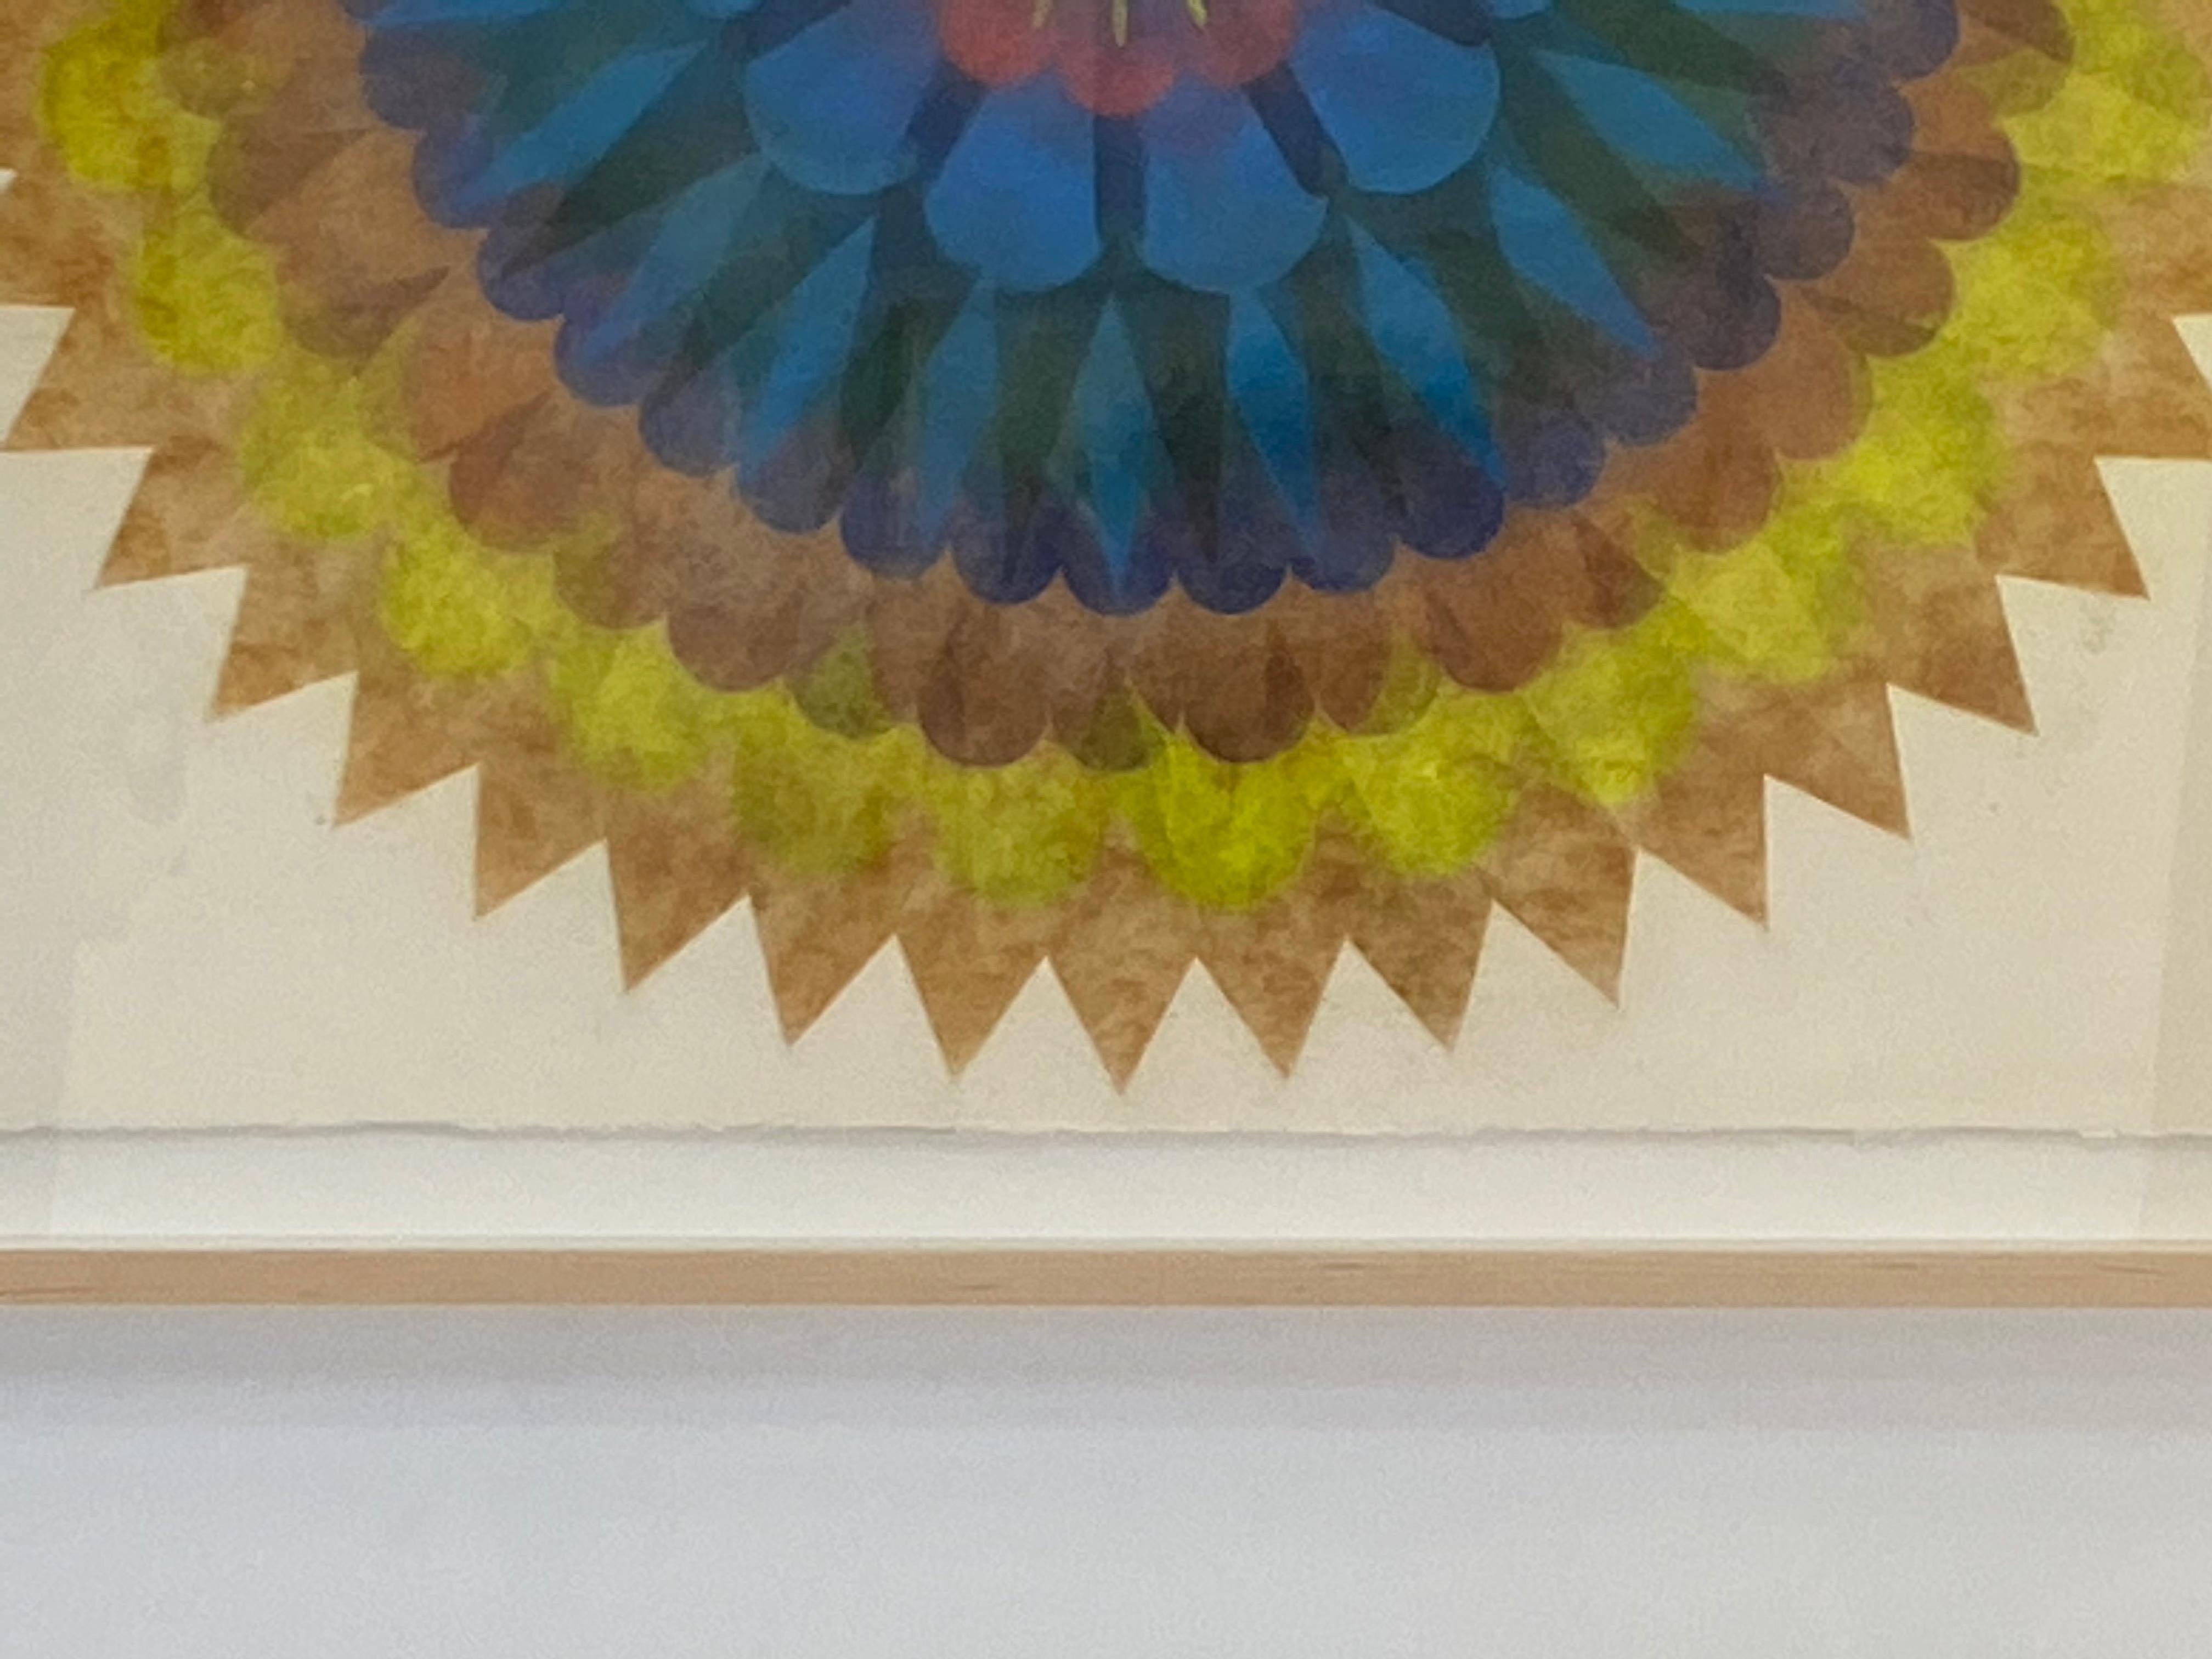 This multicolored drawing has a beautiful, soft mottled texture created with Judge's unique powered pigment technique. Poptic 09 is a predominately yellow, orange and blue mandala shape with a bright pink center creating an intricately layered